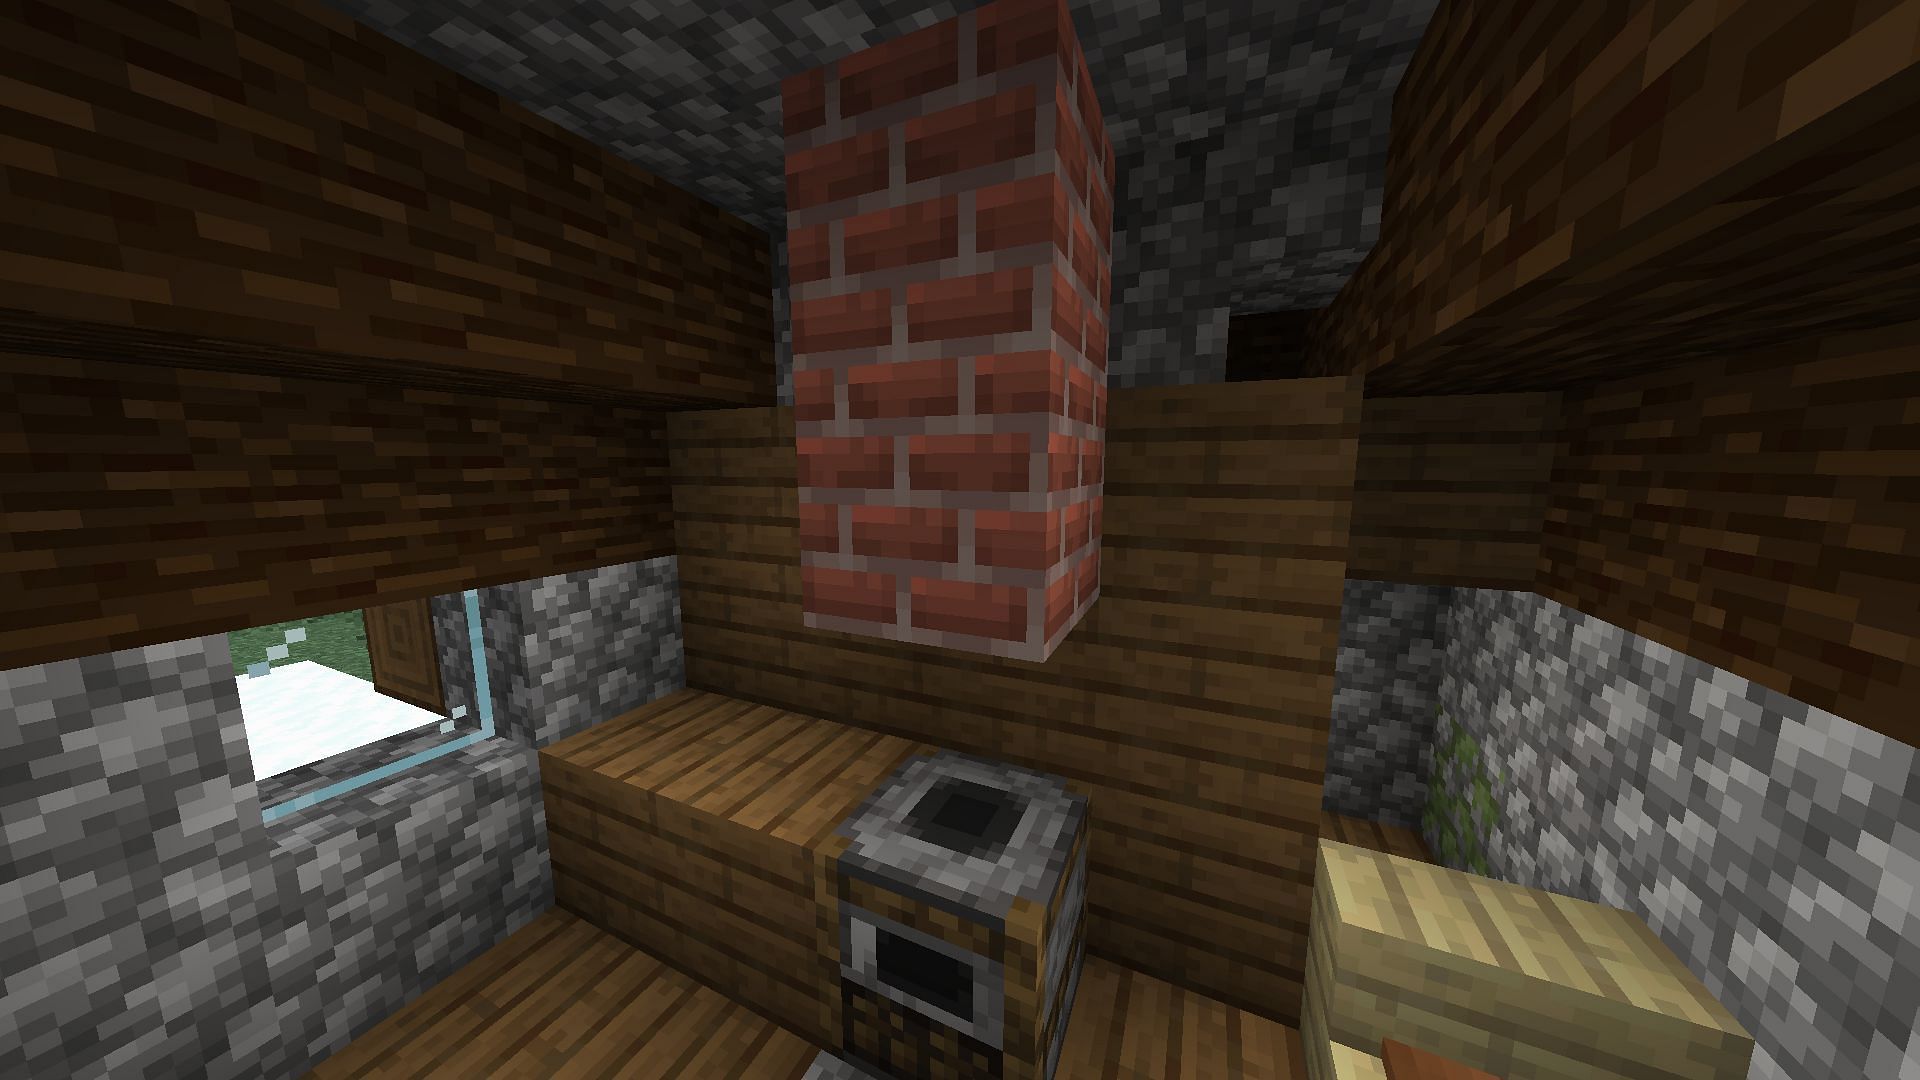 Chimney or vent over the smoker block in Minecraft (Image via Mojang)